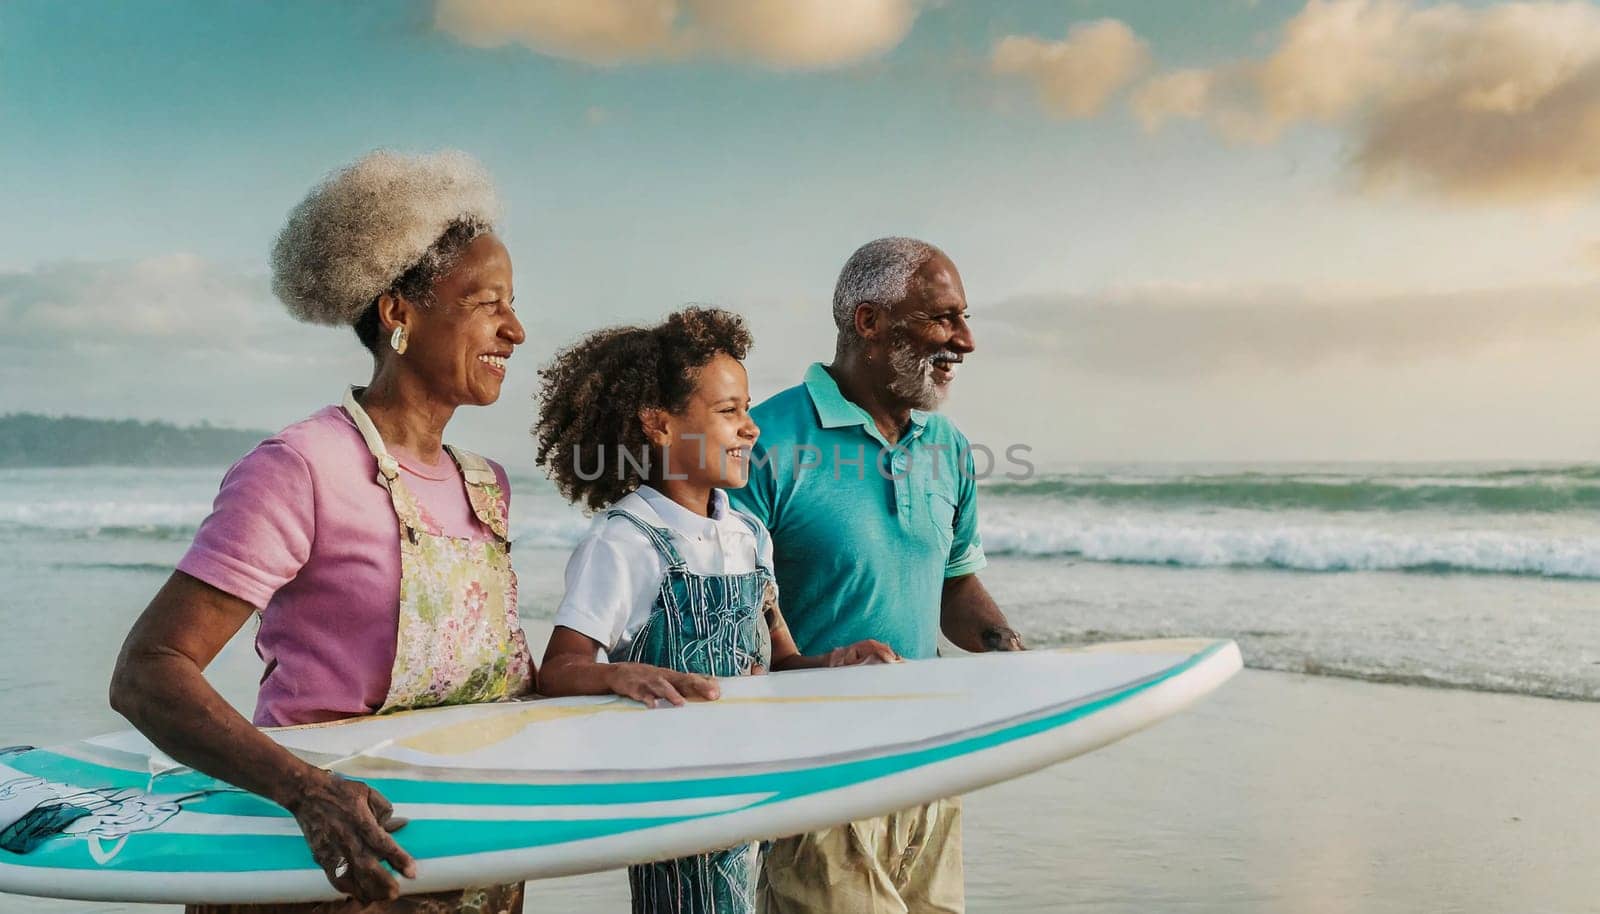 Senior black man and a child are walking on the beach with surfboards. Scene is lighthearted and fun, AI generated